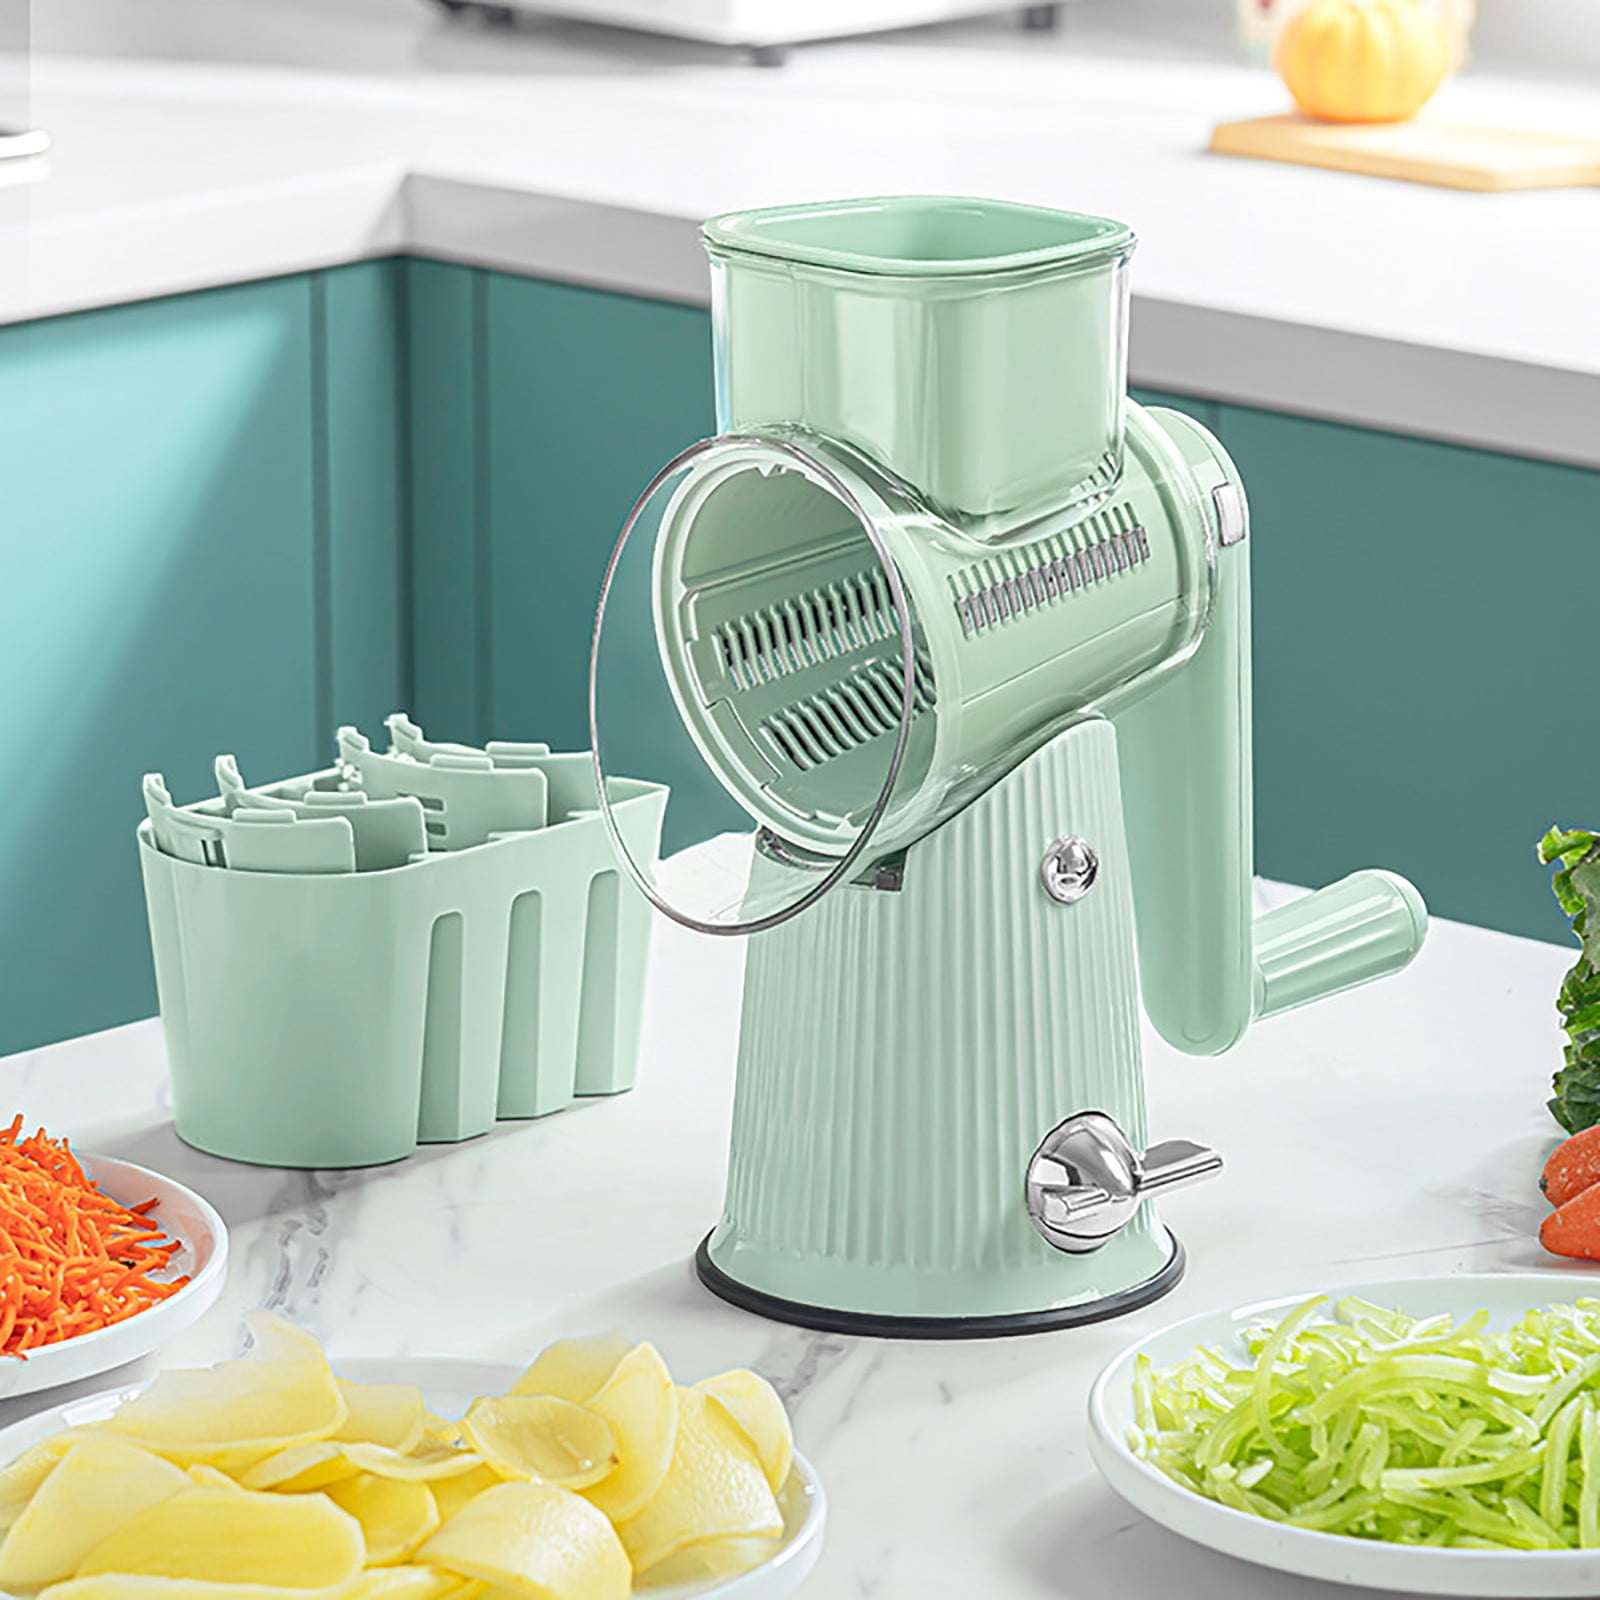 Multifunctional Vegetable Cutter Slicer – BoongBay®